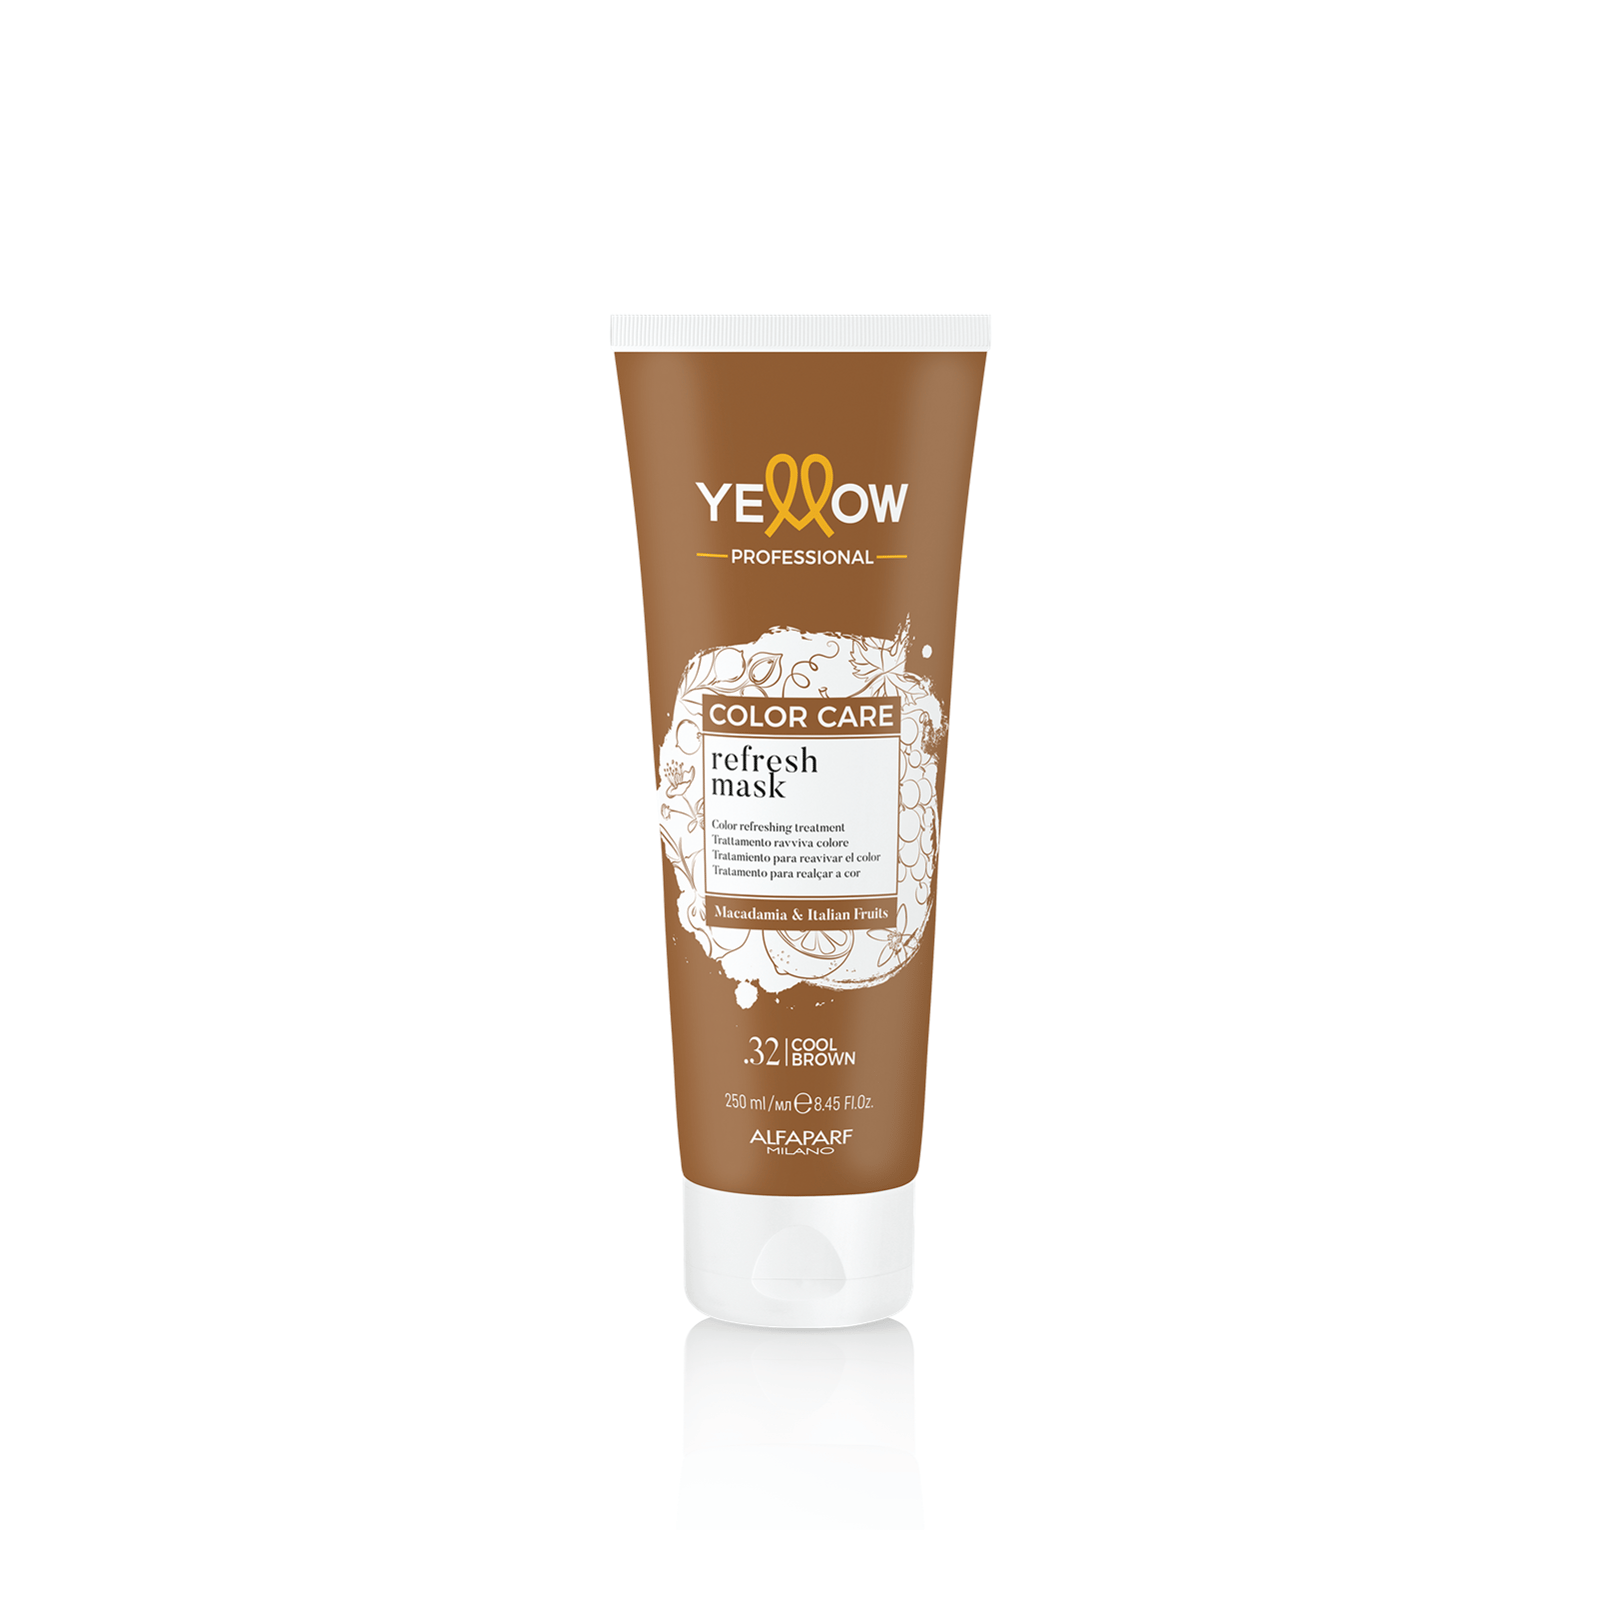 Yellow Professional Color Care Refresh Mask .32 Cool Brown 250ml (8.45 fl oz)